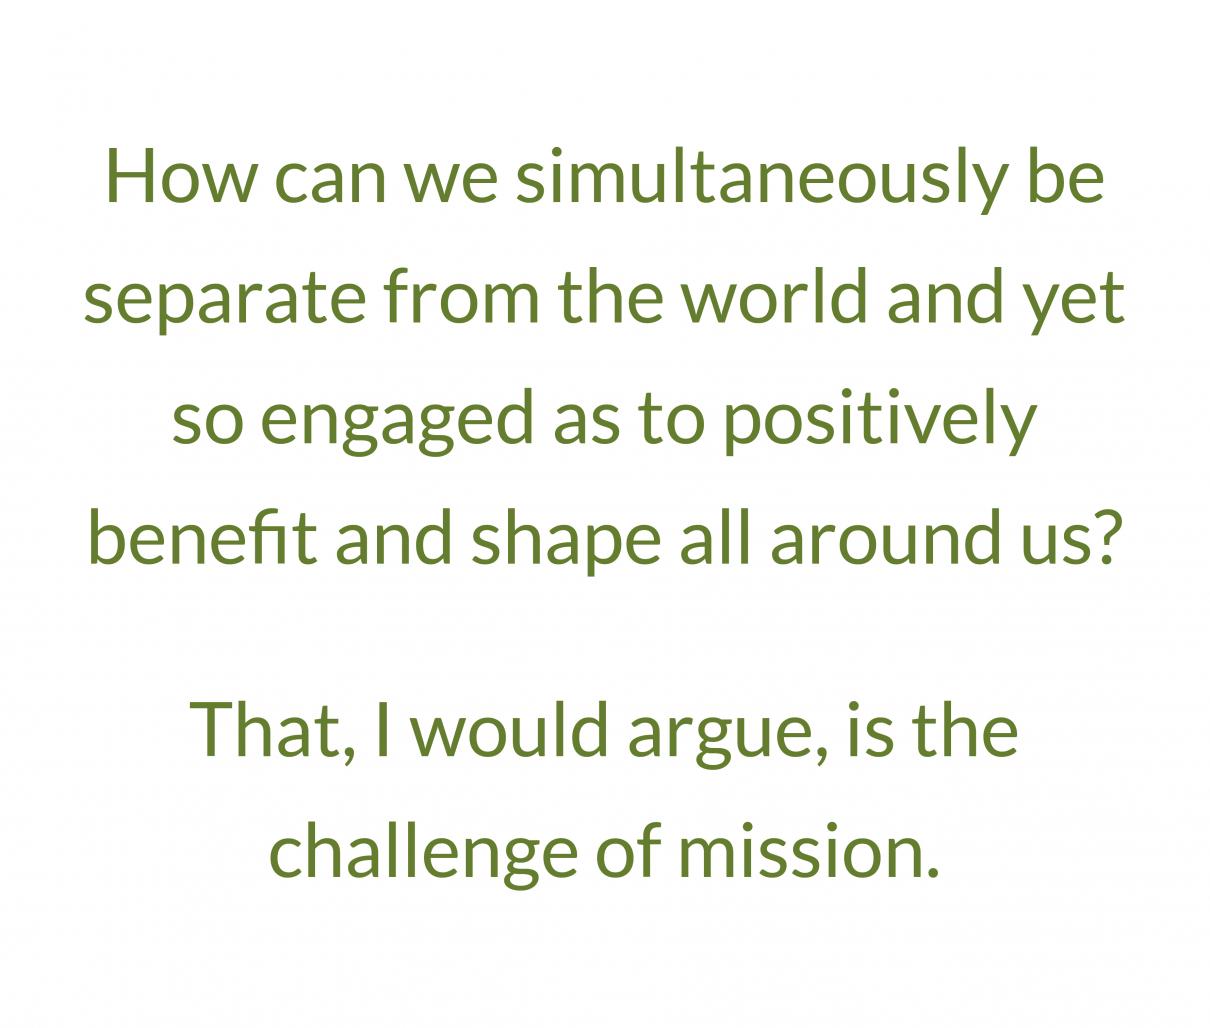 Quote: How can we simultaneously be separate from the world and yet so engaged as to positively benefit and shape all around us? That, I would argue, is the challenge of mission.